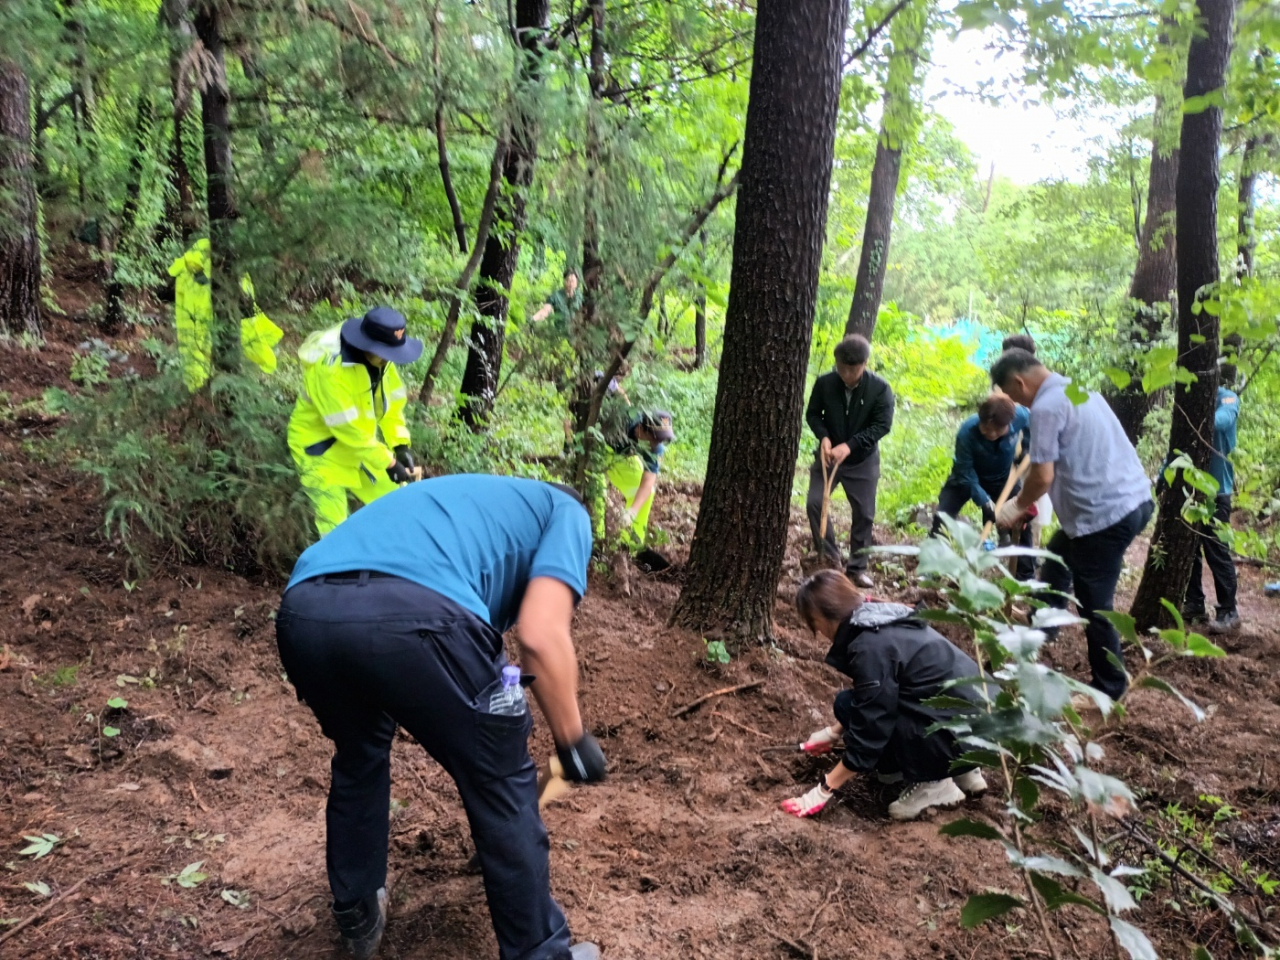 Police are seen searching a hillside in Geoje, South Gyeongsang Province, on June 5 to locate the body of a baby boy allegedly murdered and buried by his mother. (Gyeongnam Provincial Police)